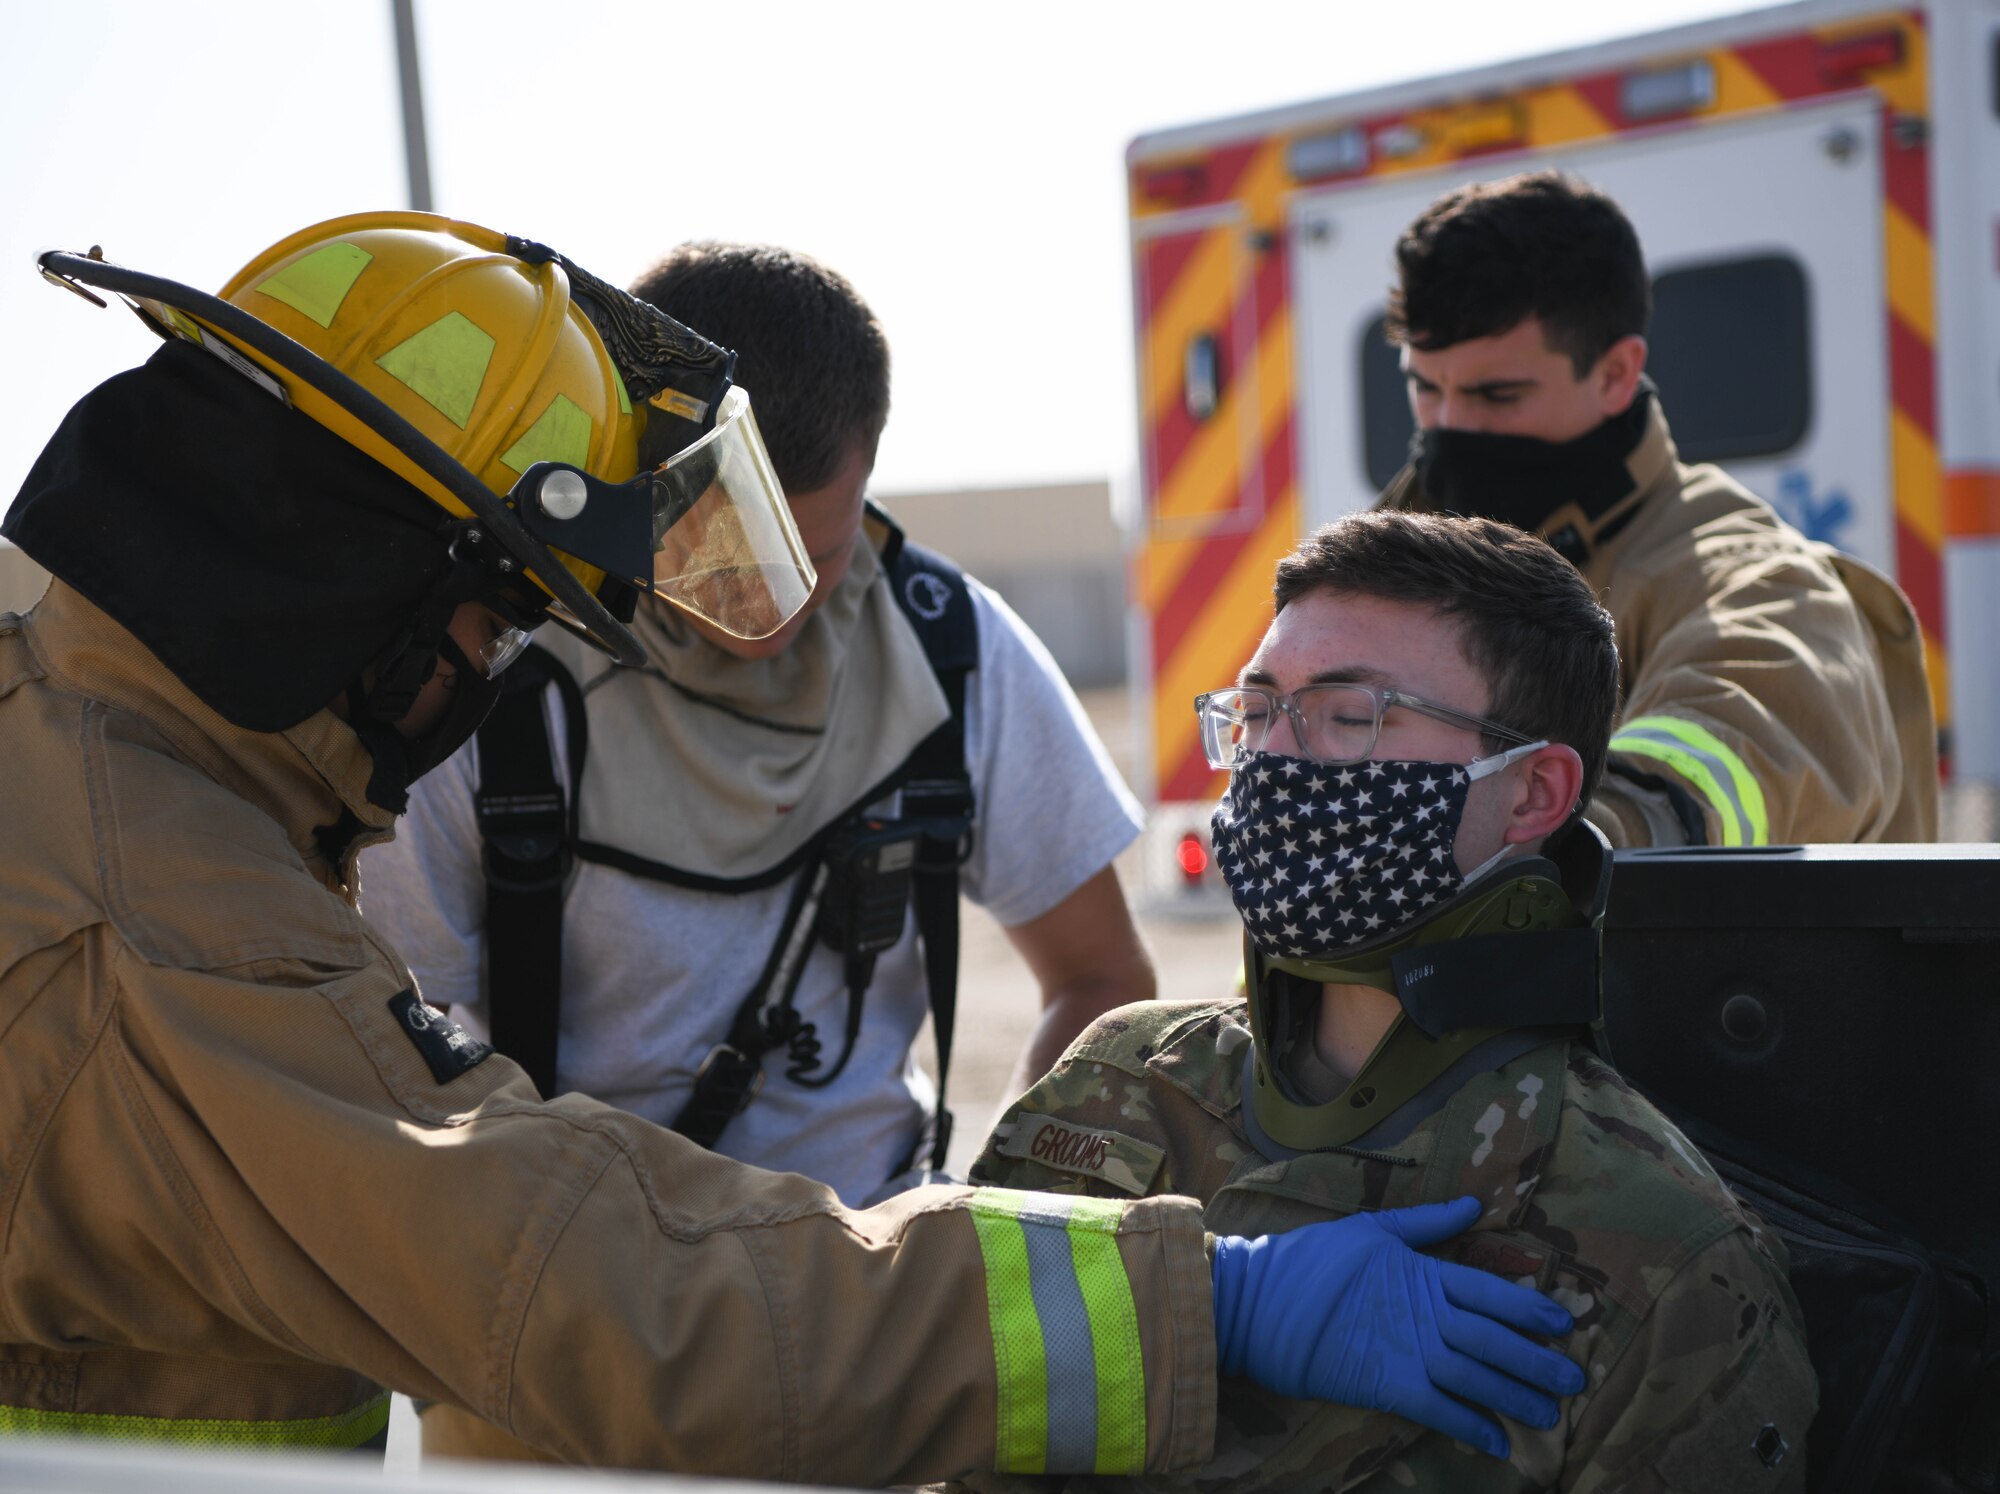 A firefighter from the 380th Expeditionary Civil Engineer Squadron checks on a victim during the Major Accident Response Exercise (MARE) September 3, 2020, at Al Dhafra Air Base, United Arab Emirates.